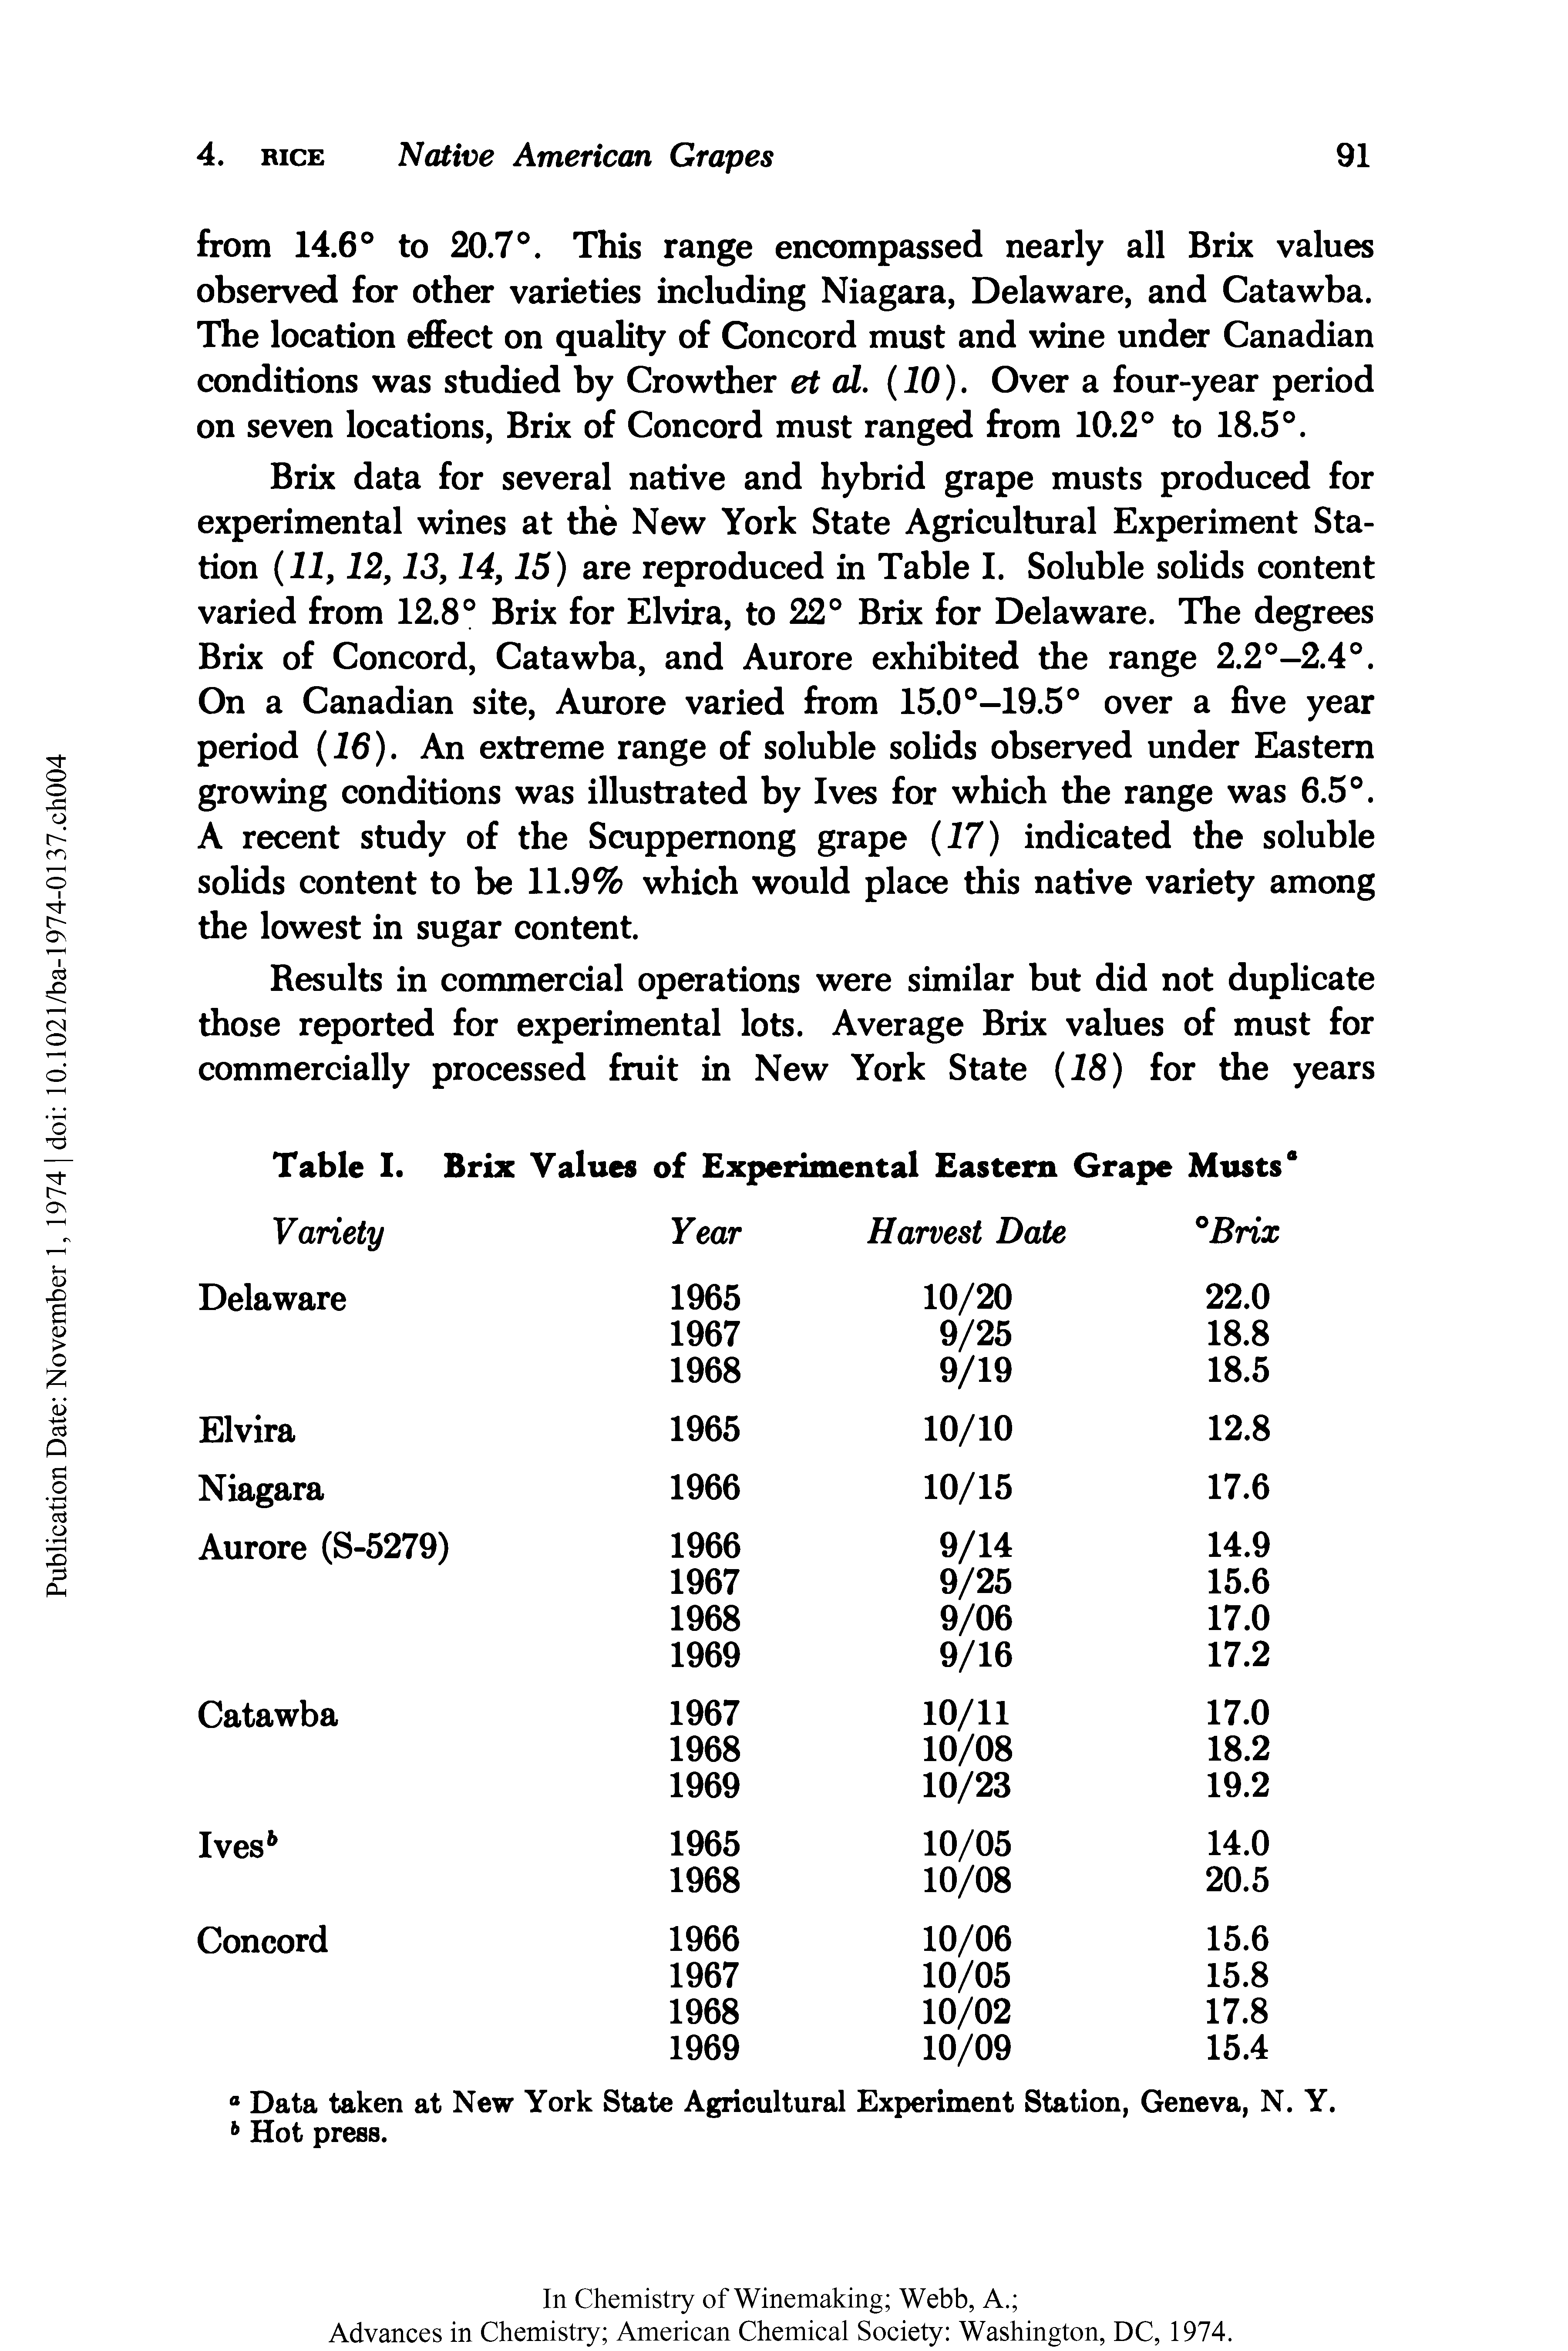 Table I. Brix Values of Experimental Eastern Grape Musts0...